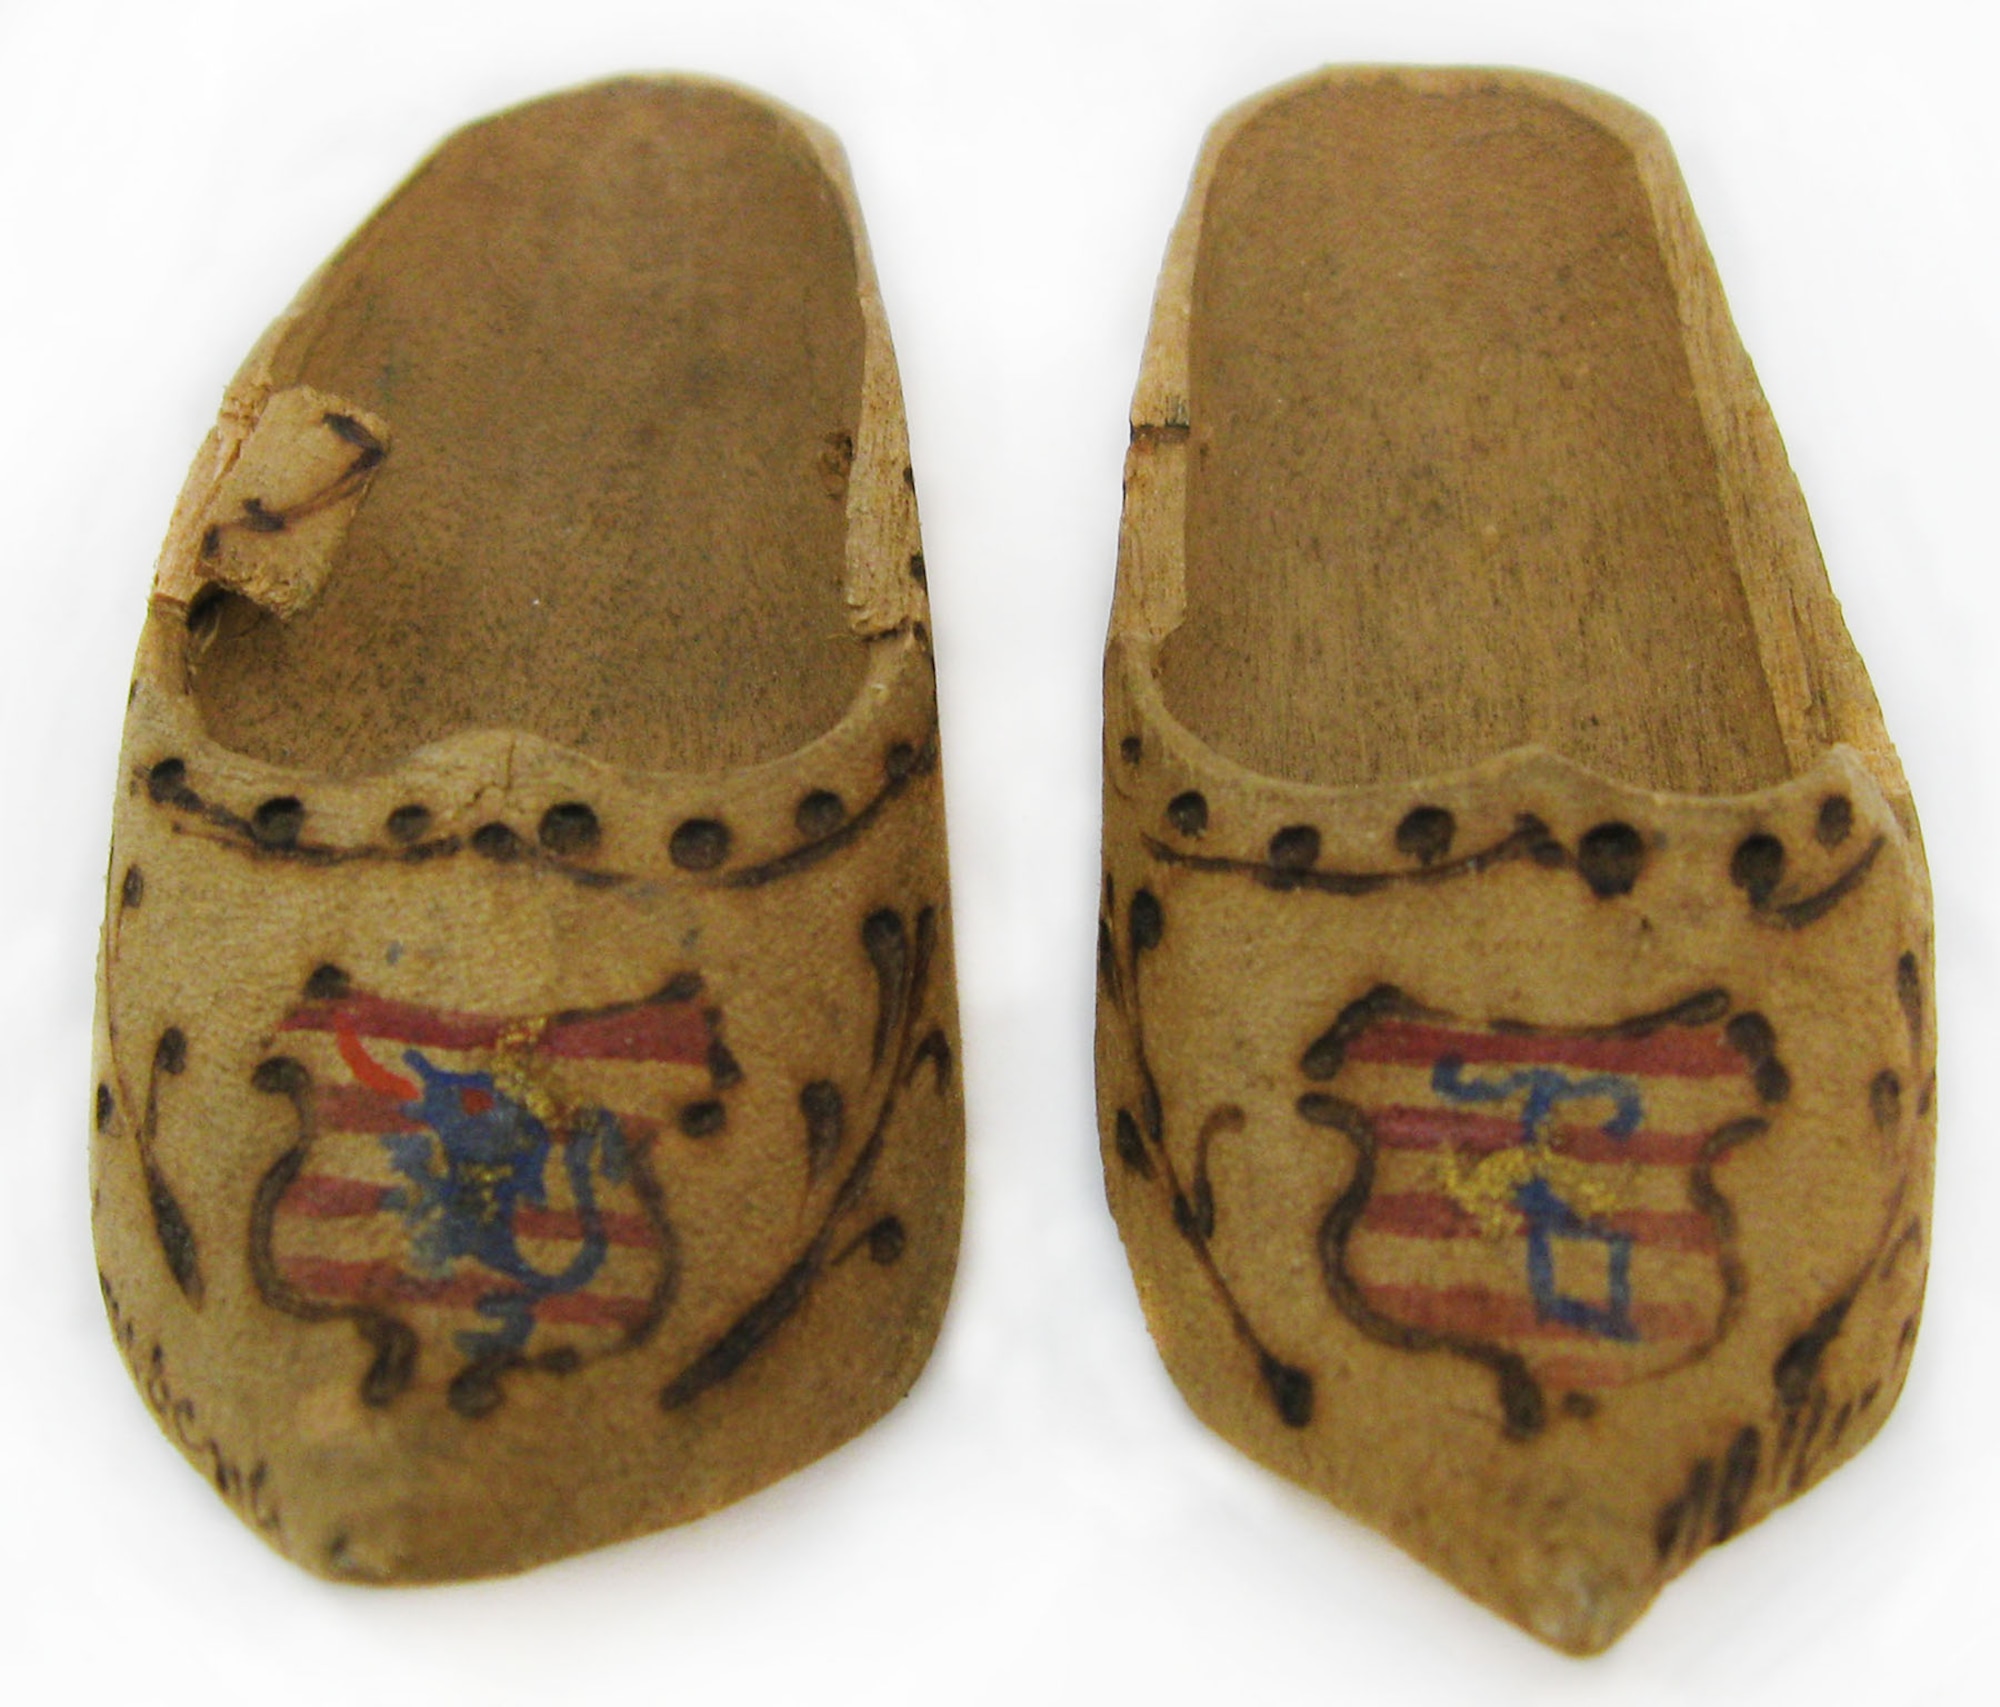 These souvenir miniature wooden shoes are approximately 7/8 inches high by 1-3/16 inches wide by 3 inches long. The design was both painted onto and burned into each shoe. (U.S. Air Force photo)